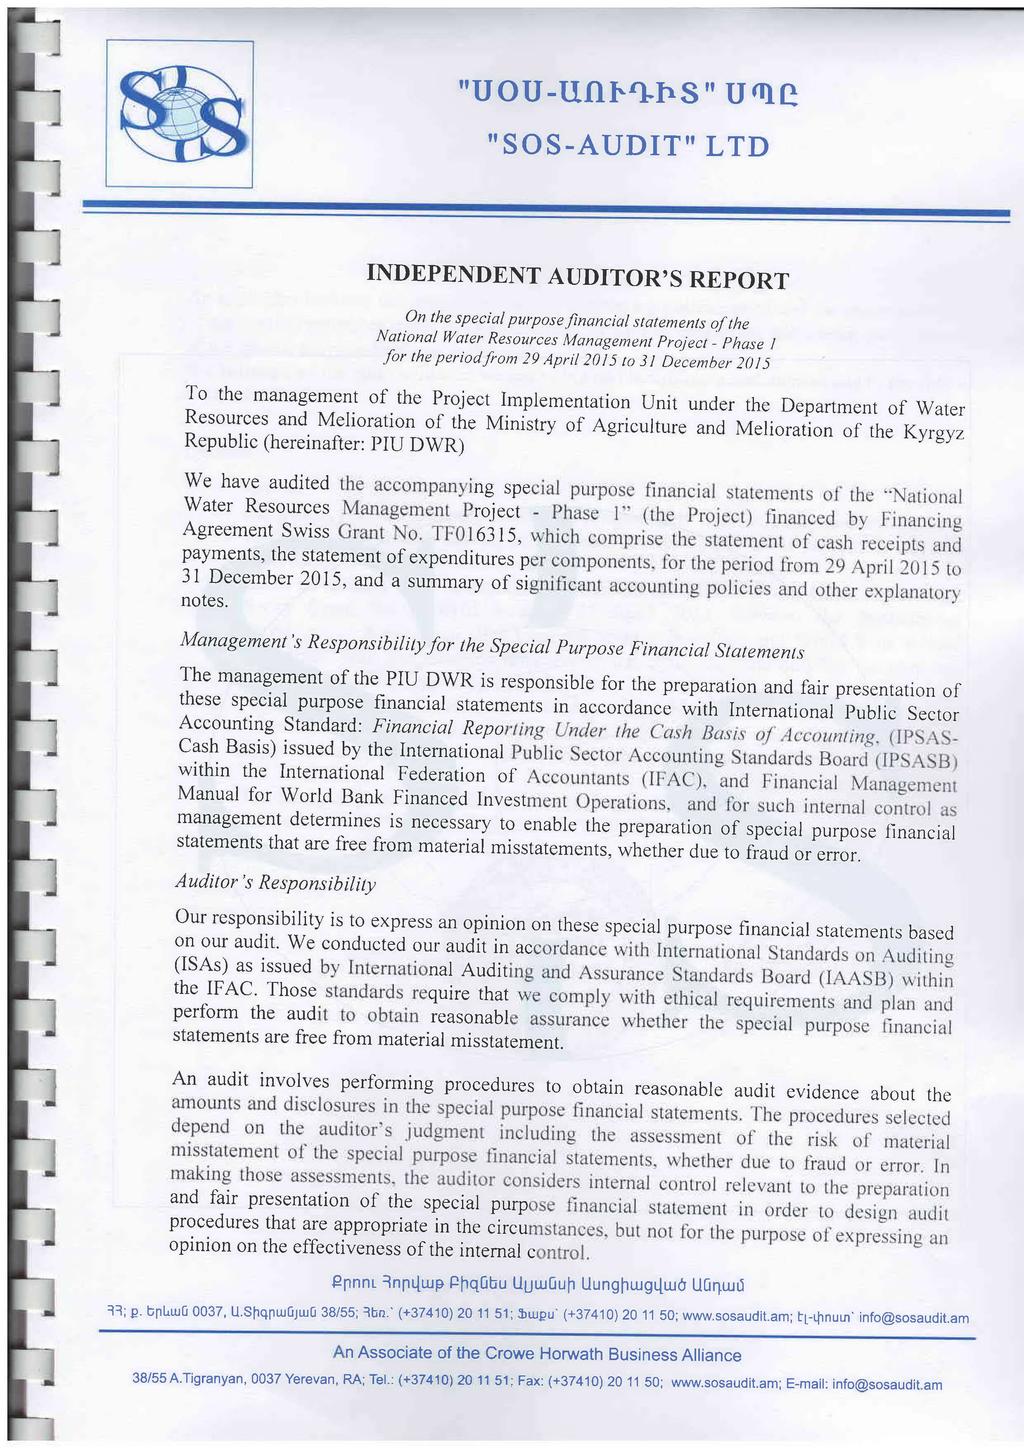 "UOU-MU V-1sS" U(11 "SOS-AUDIT" LTD INDEPENDENT AUDITOR'S REPORT On the special purpose financial statements of the National Water Resources Management Project - Phase I for the period from 29 April